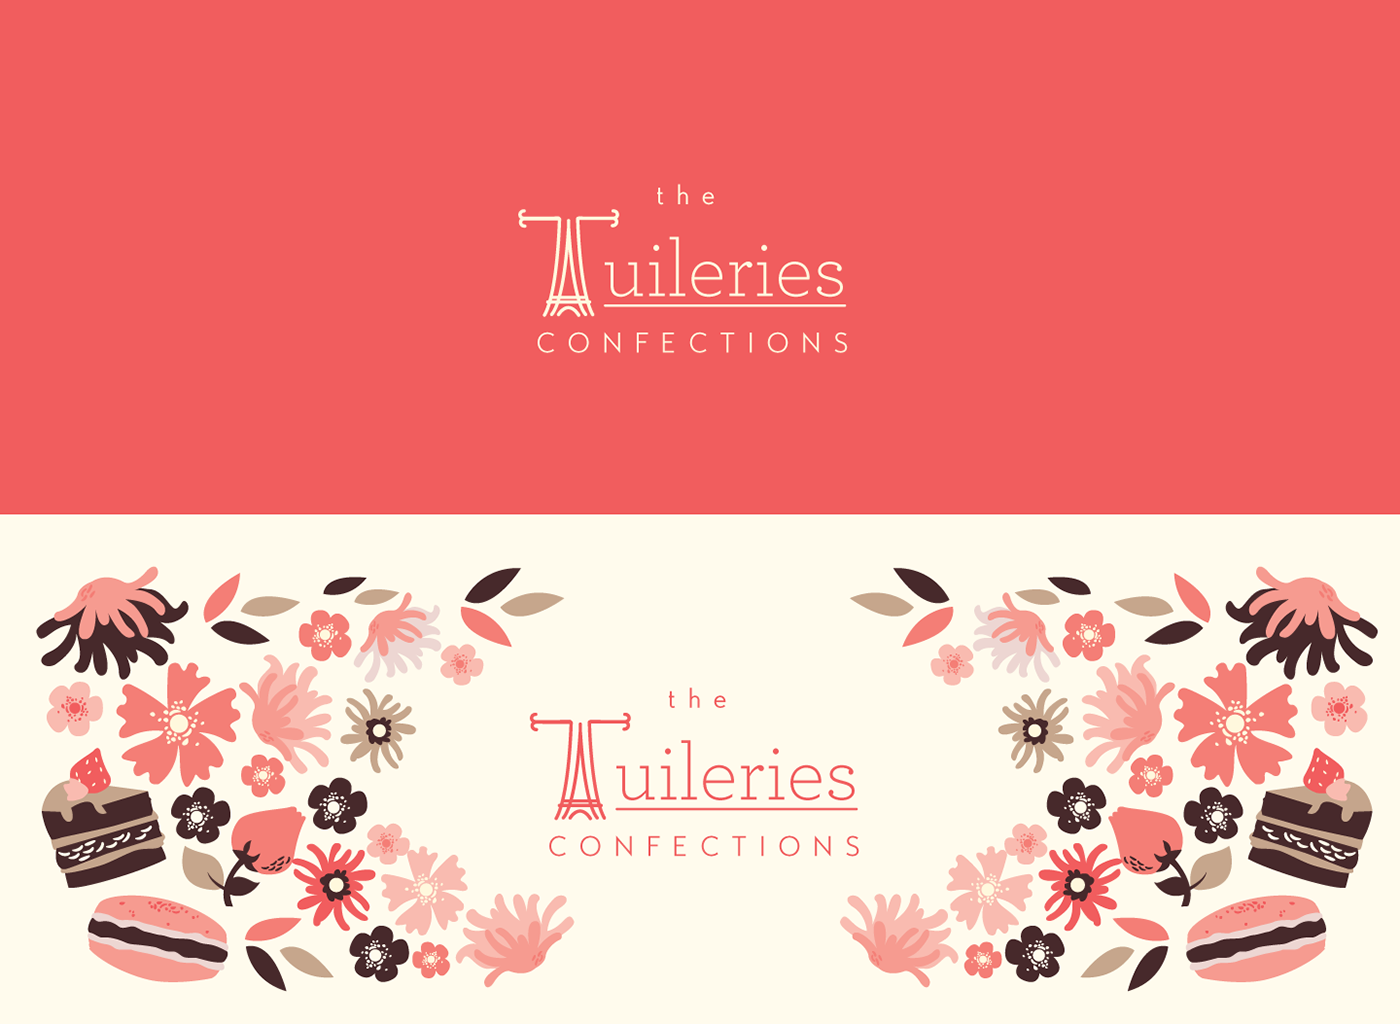 Tuileries Confections Flowers French desserts Sweets whimsical